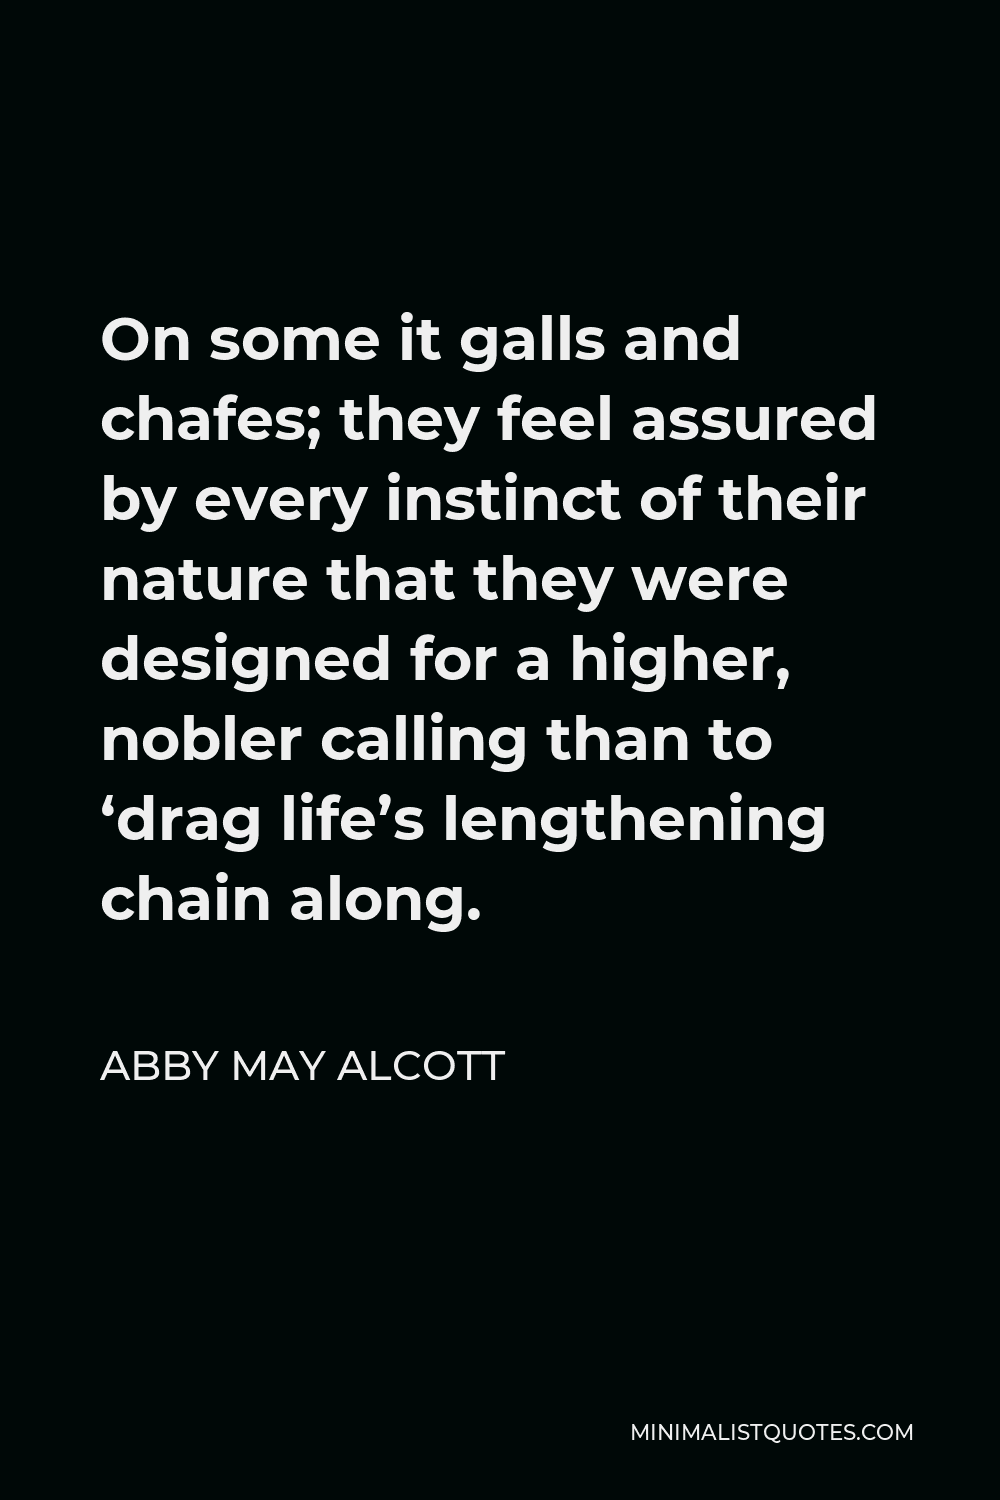 Abby May Alcott Quote - On some it galls and chafes; they feel assured by every instinct of their nature that they were designed for a higher, nobler calling than to ‘drag life’s lengthening chain along.